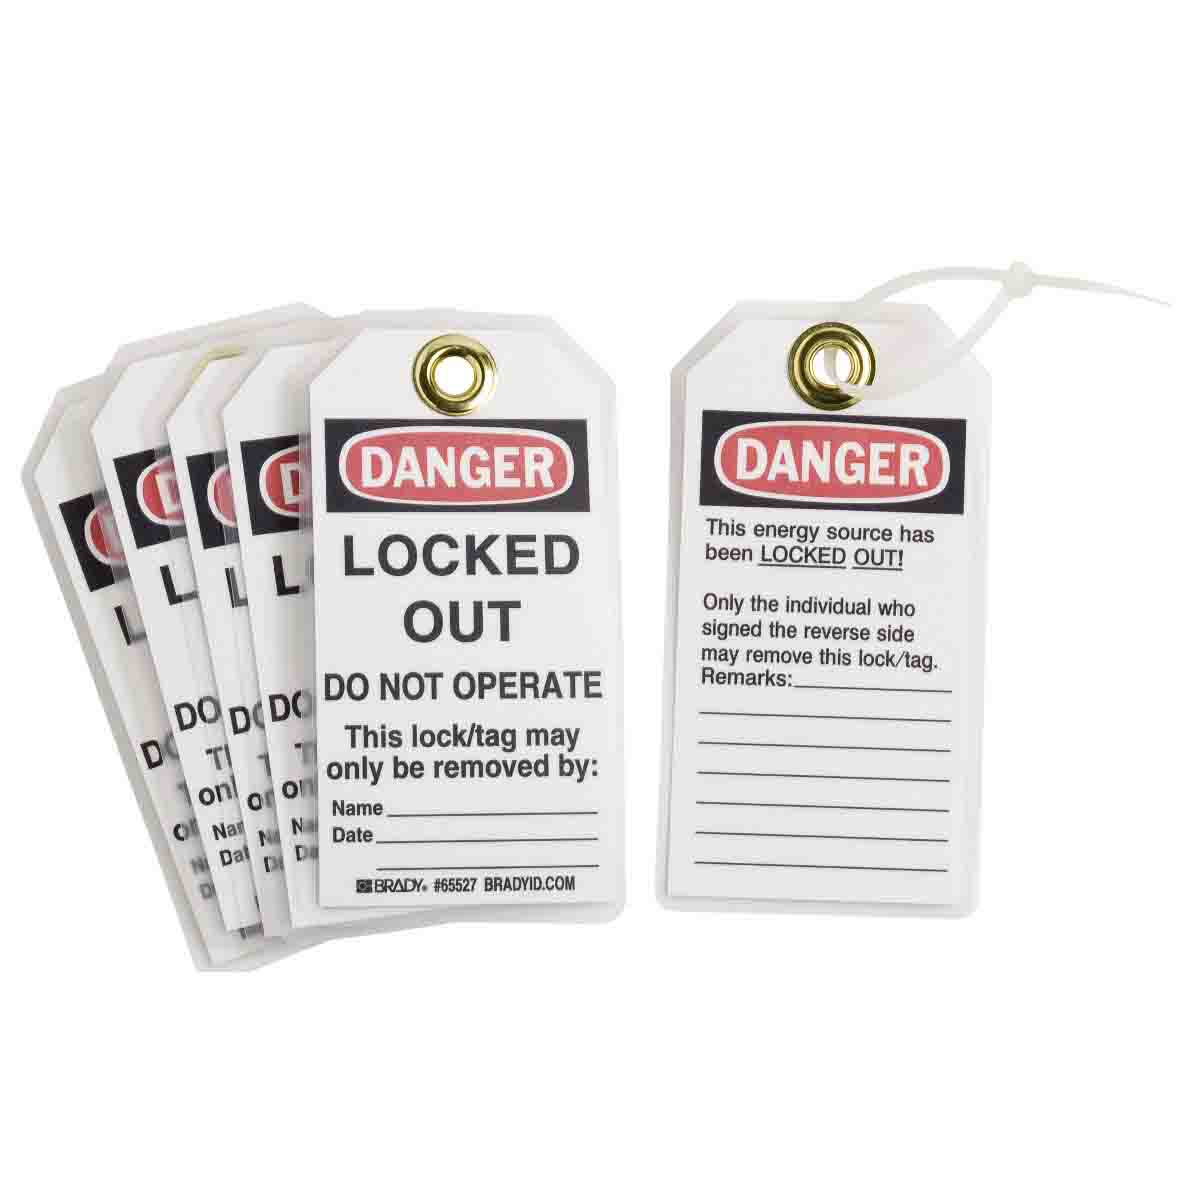 Brady® 65501 2-Sided Rectangular Self-Laminating Danger Tag, 5-3/4 in H x 3 in W, Black/Red on White, 3/8 in Hole, B-851 Polyester